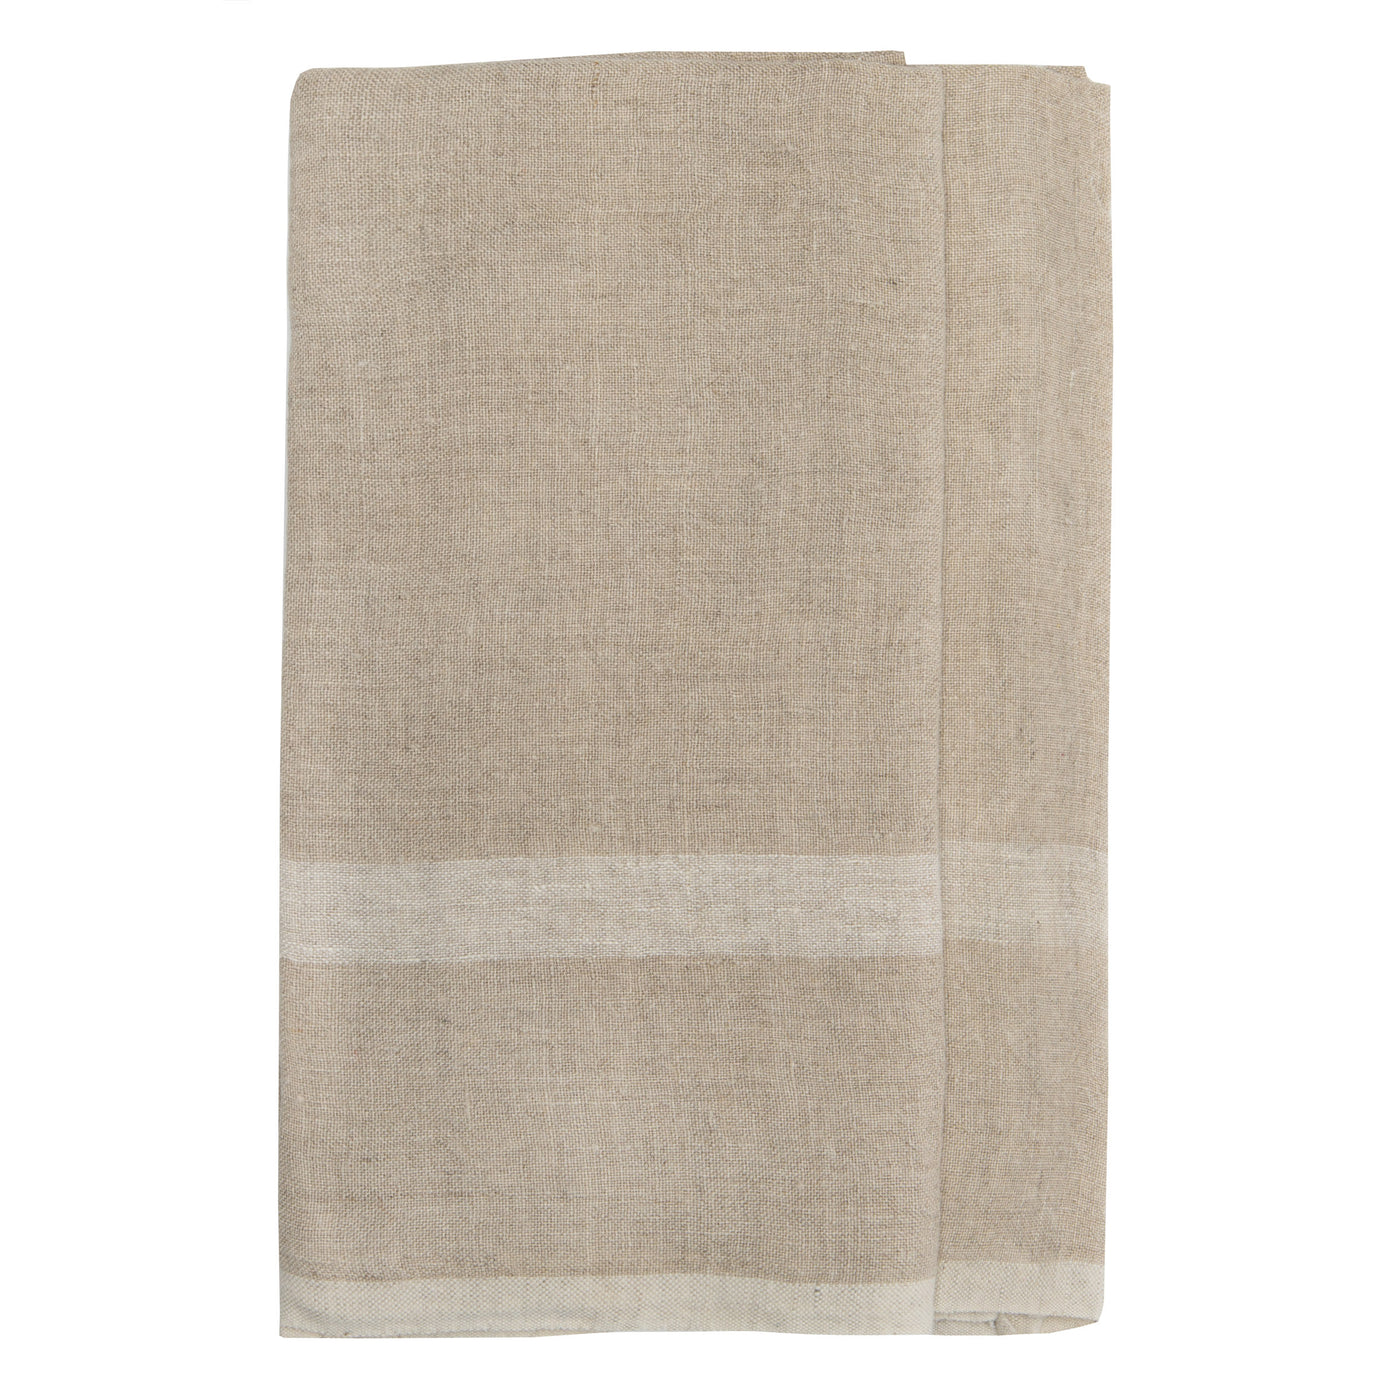 Laundered Linen Kitchen Towels Natural & White, Set of 2